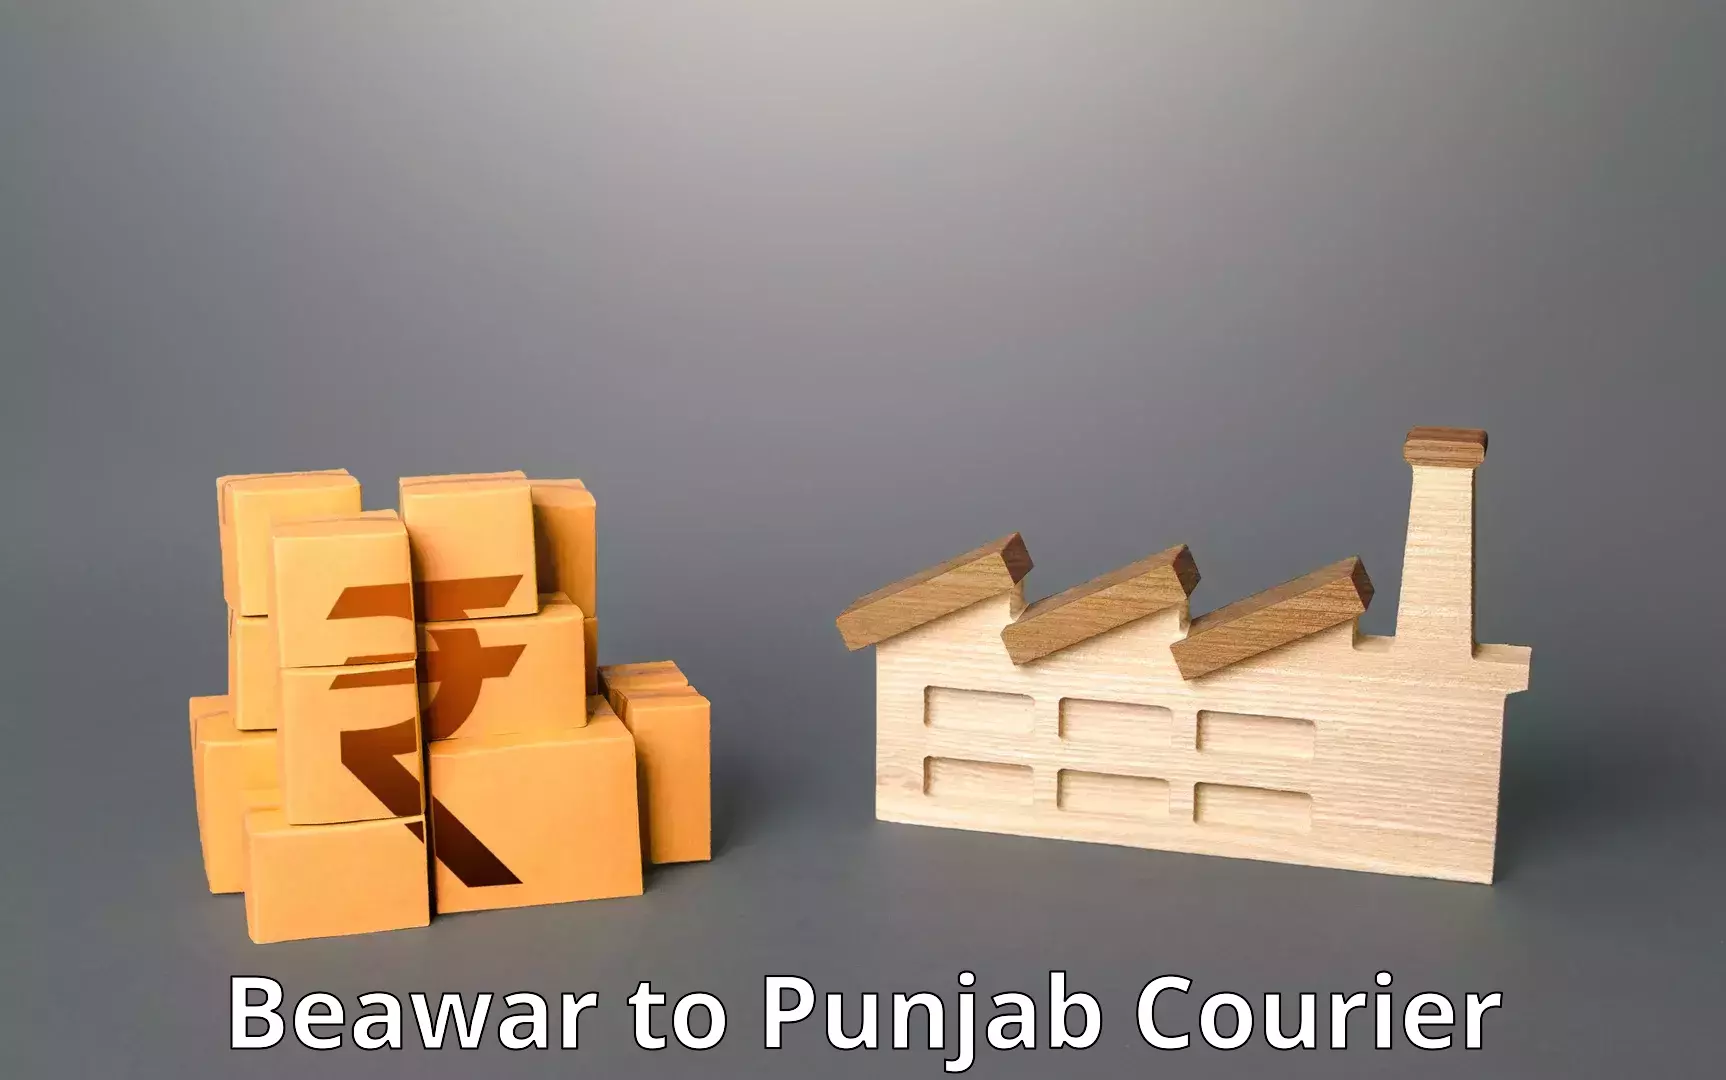 Residential courier service Beawar to Malout